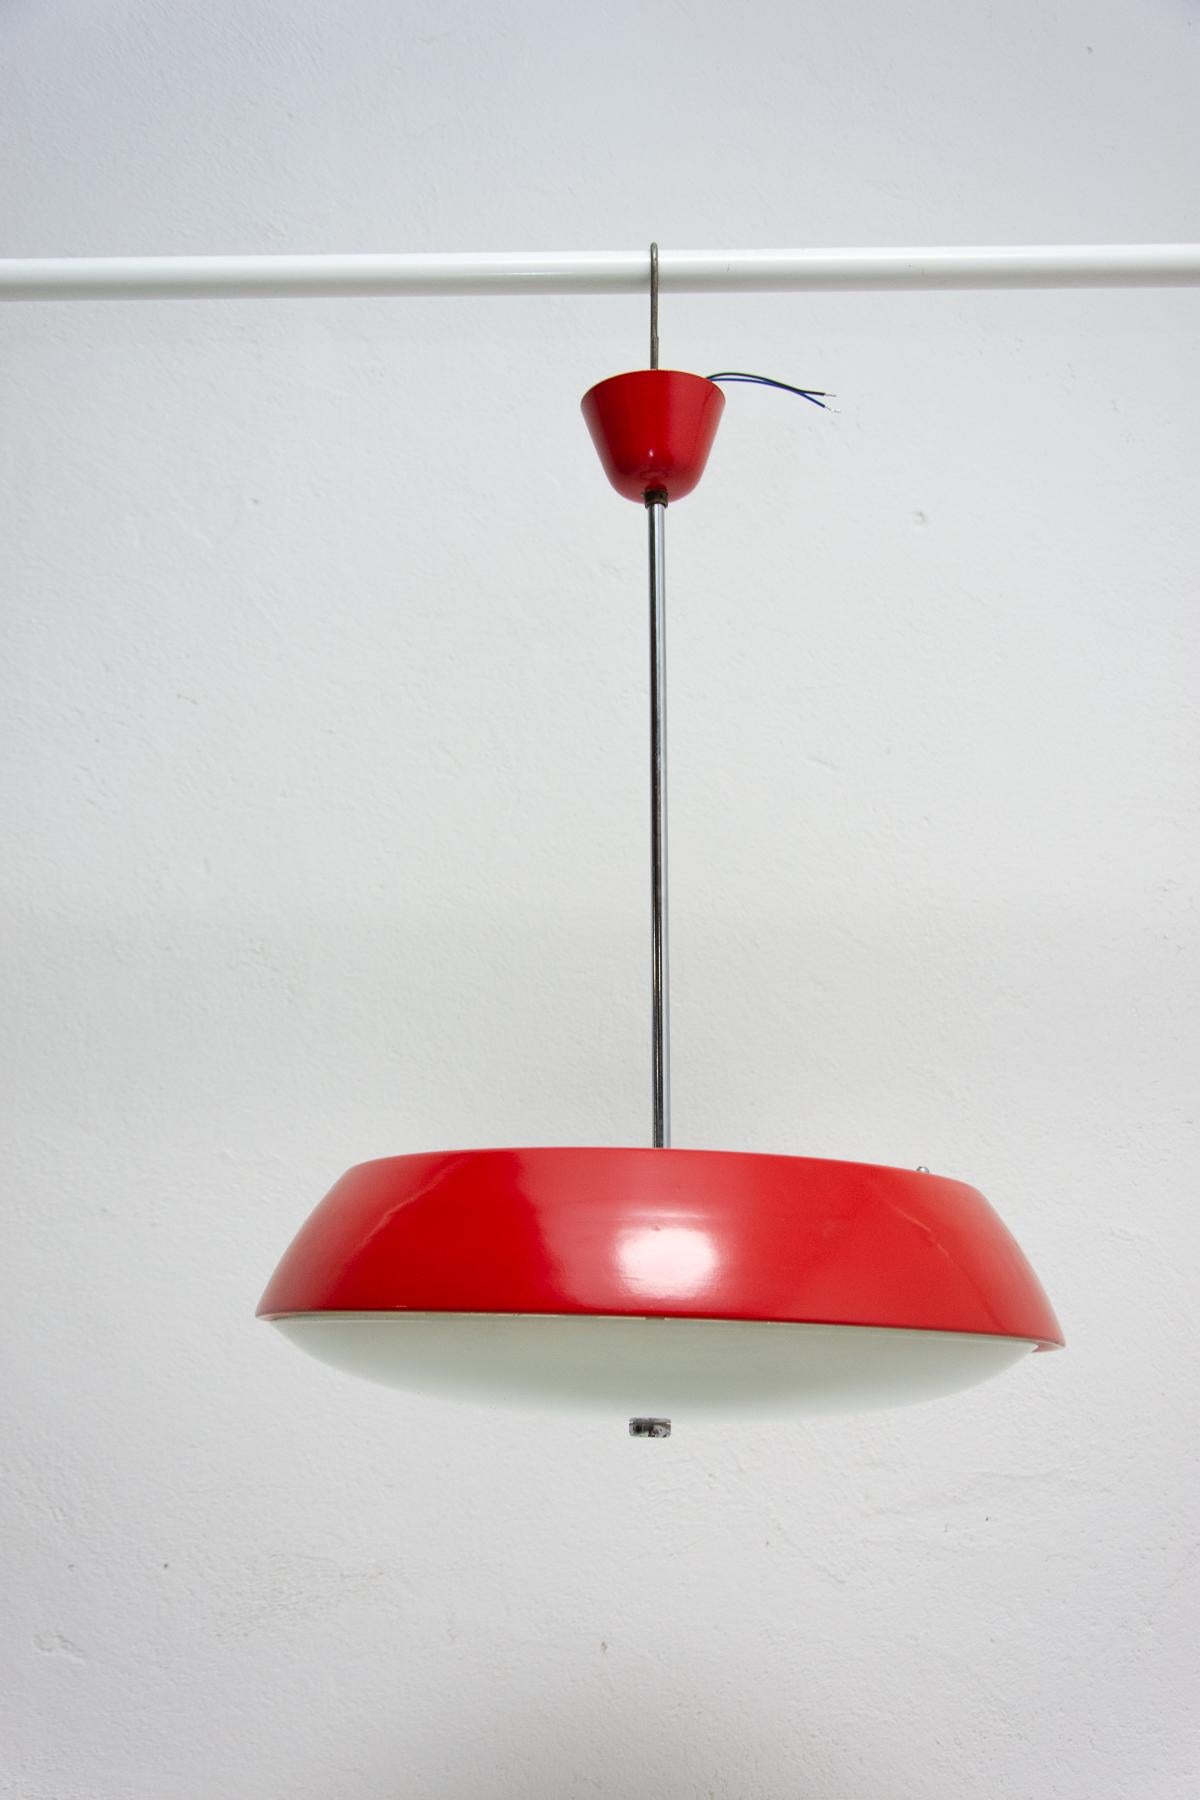 midcentury pendant “UFO”, 1960´s. Designed by Josef Hurka for Napako. Material: sheet metal, glass, plastic.
In very good condition, it has no defects, but it may show slight traces of use. Professionaly cleaned, new